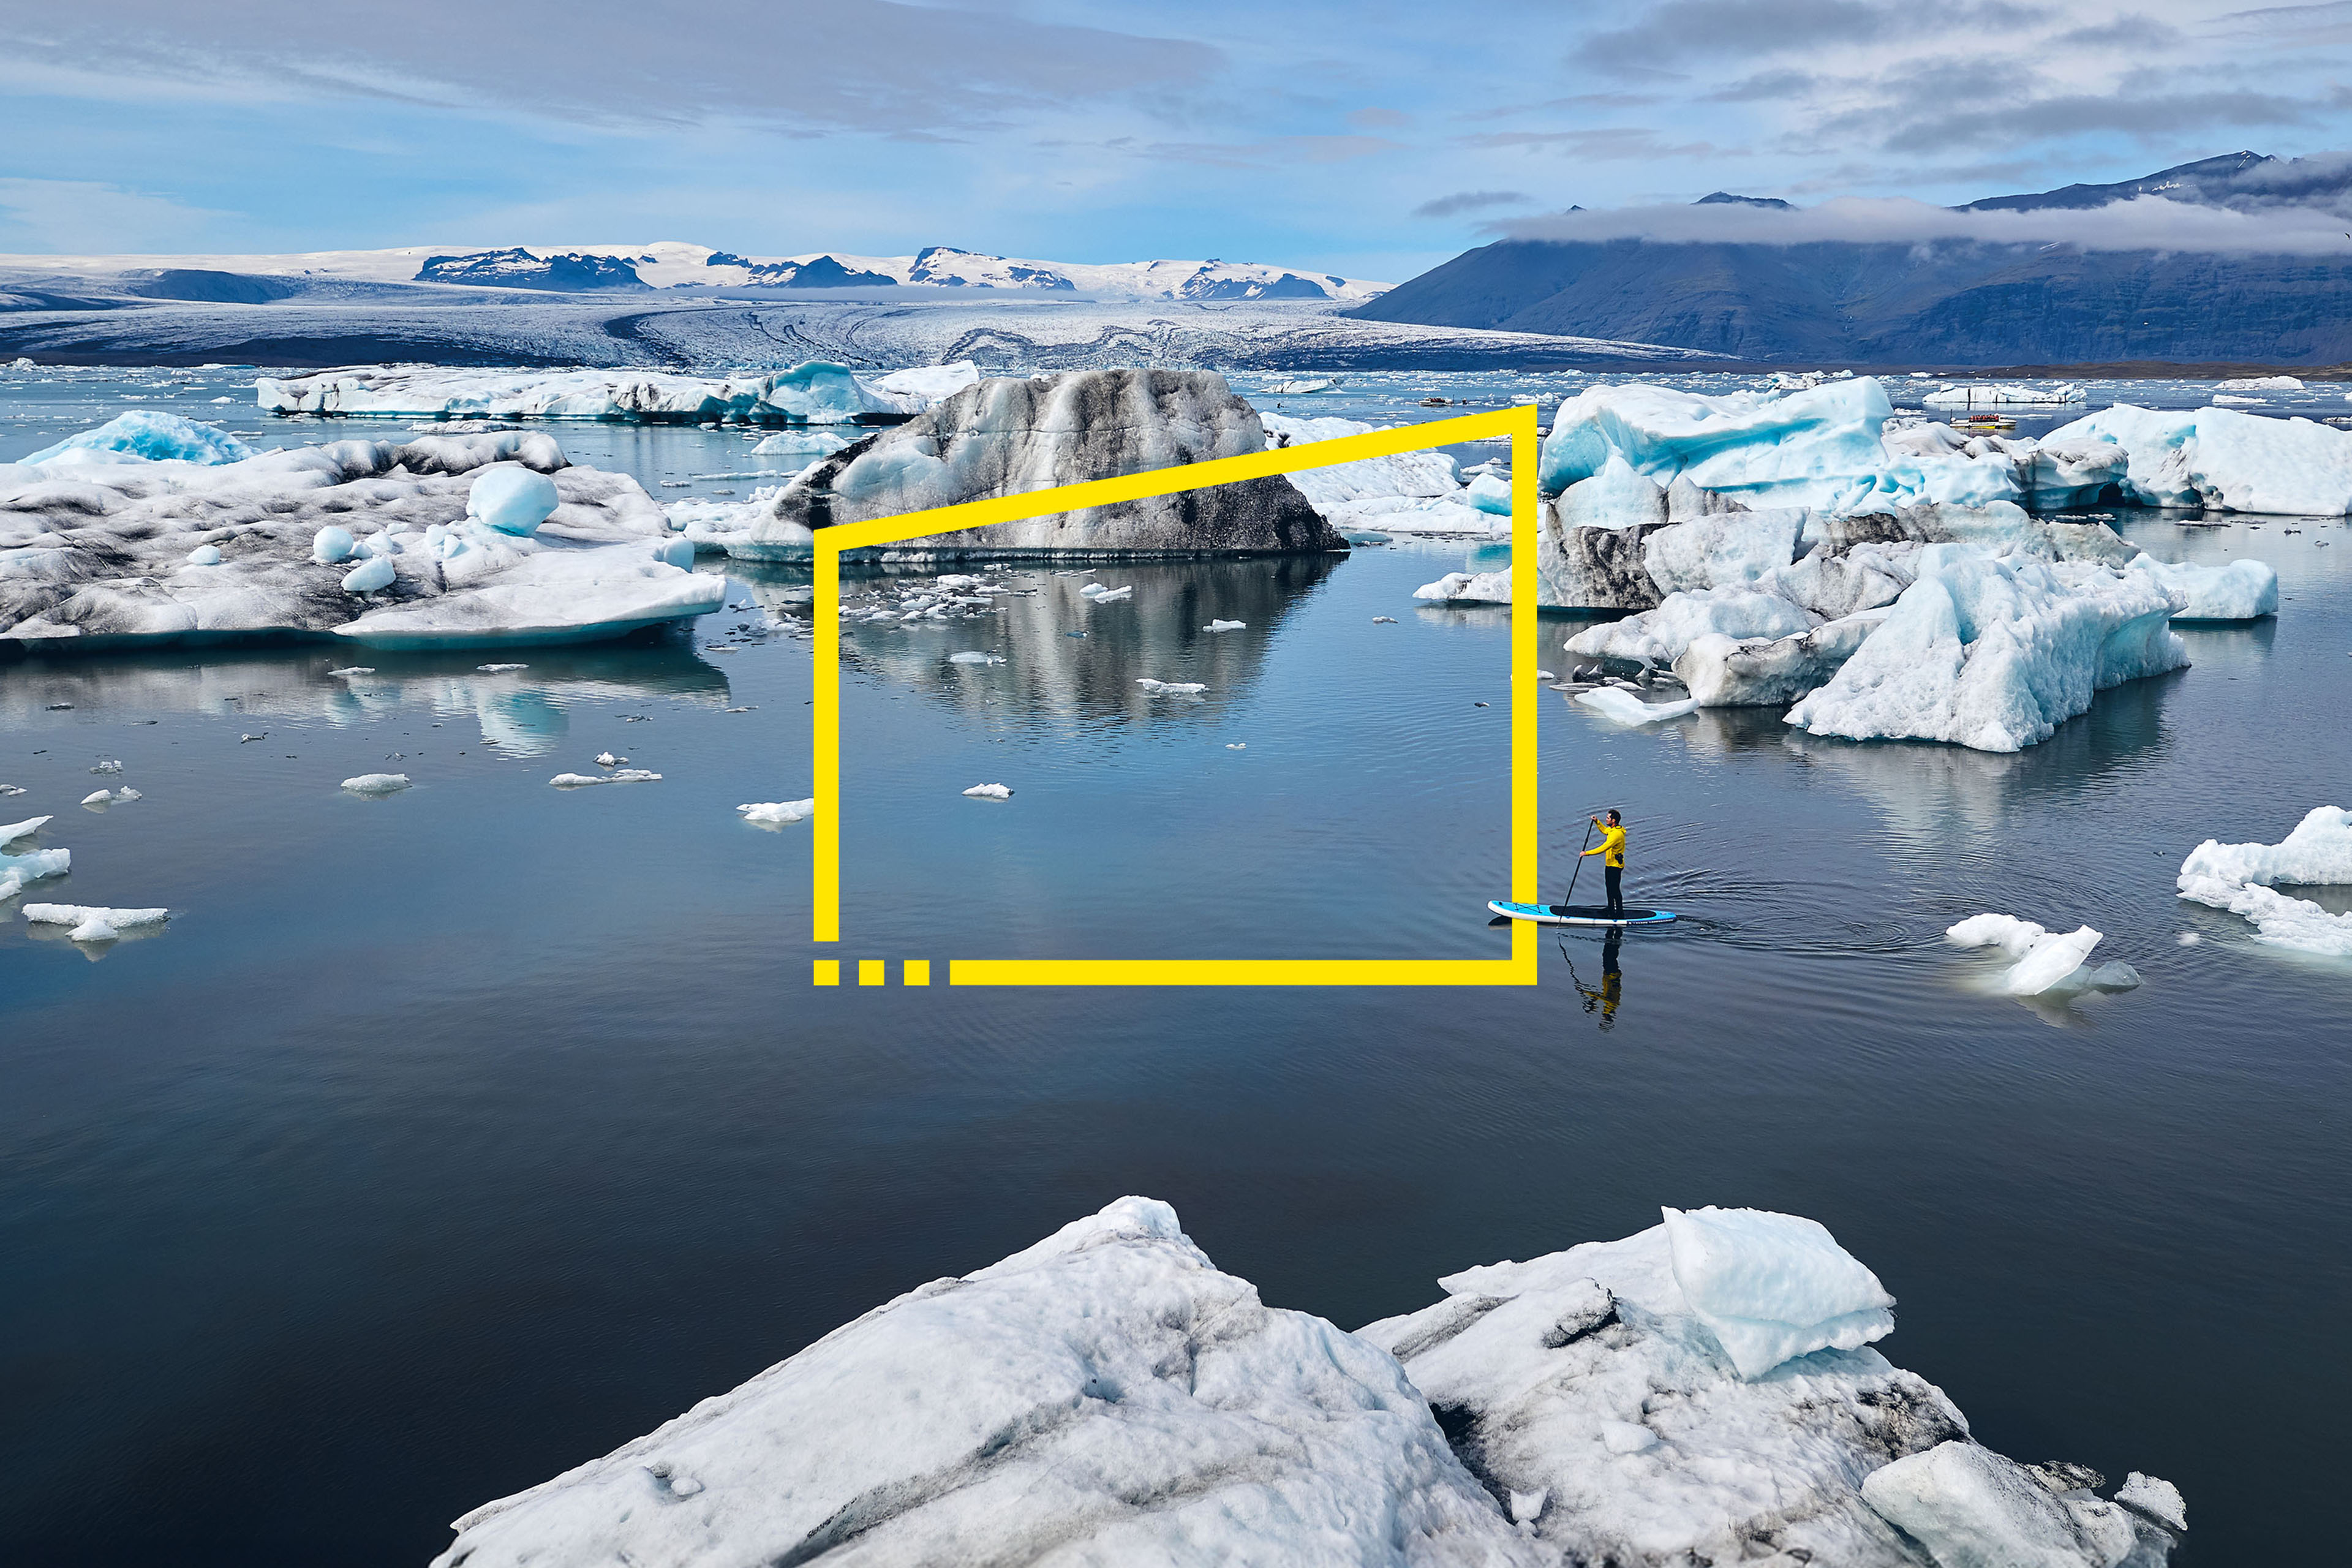 Man stand up paddle boarding through glacier lagoon in Iceland